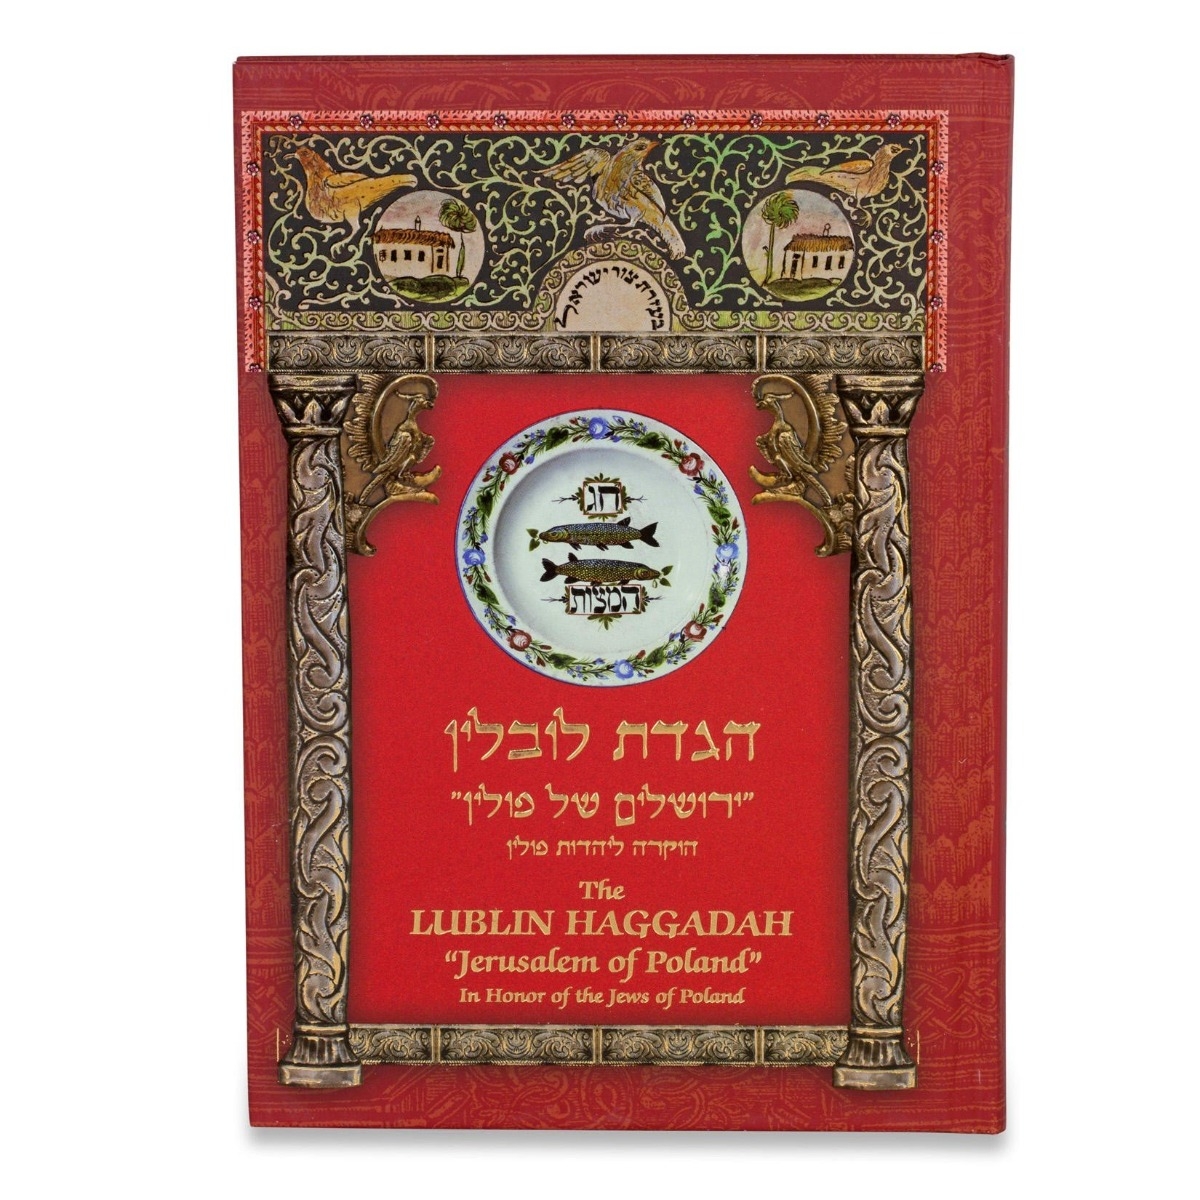 Hardcover Edition of The Lublin Passover Haggadah (English/Hebrew) - 1